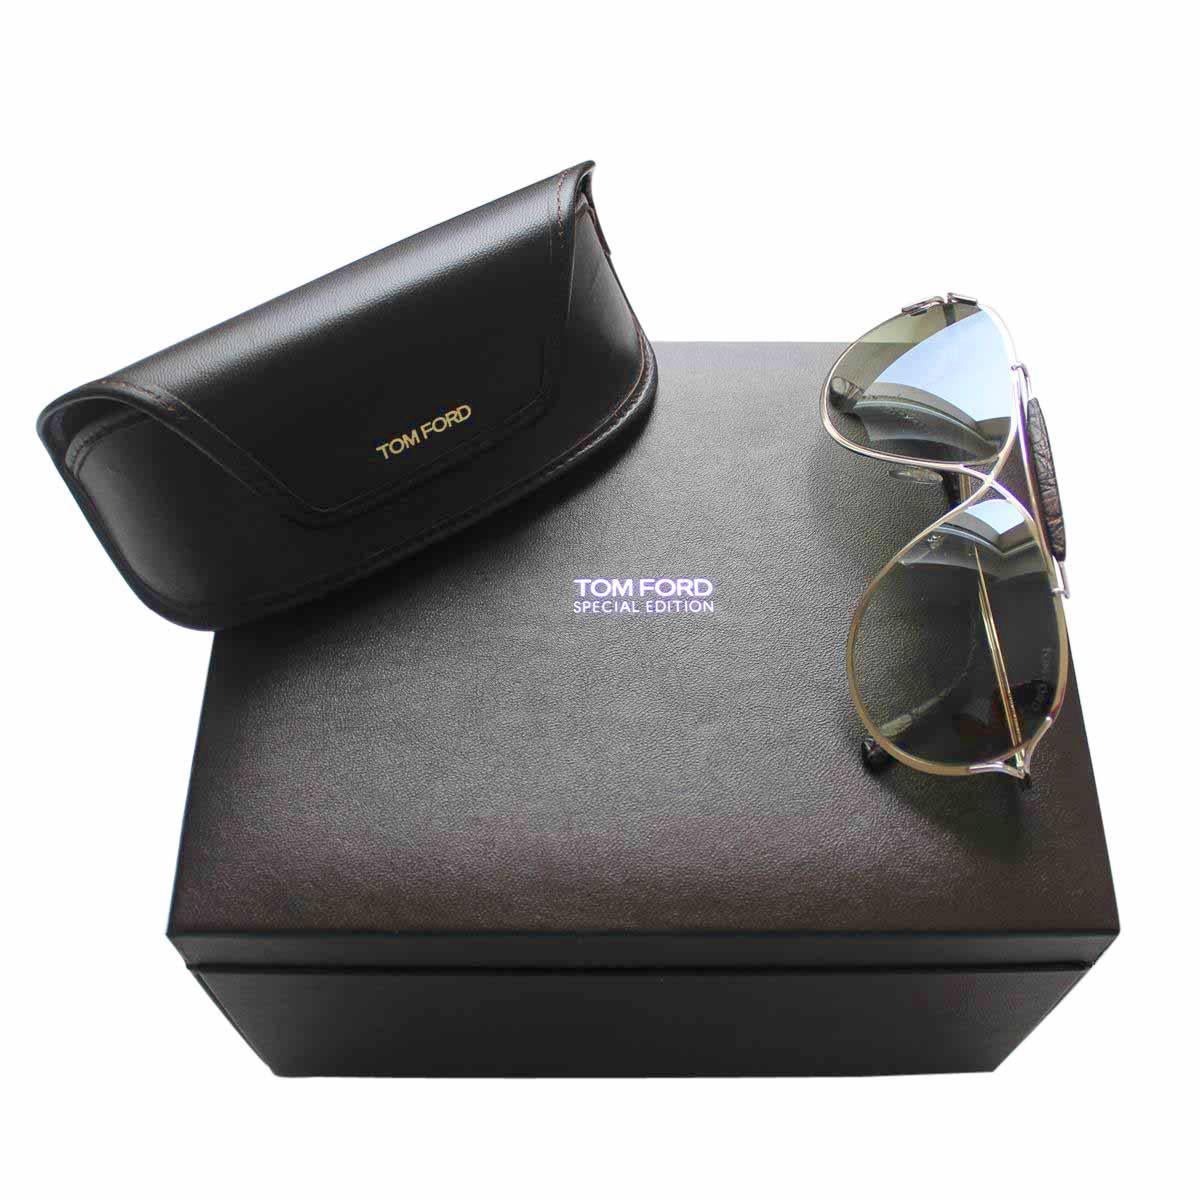 Black Bran New Tom Ford Alexander Limited Edition White Gold Sunglasses